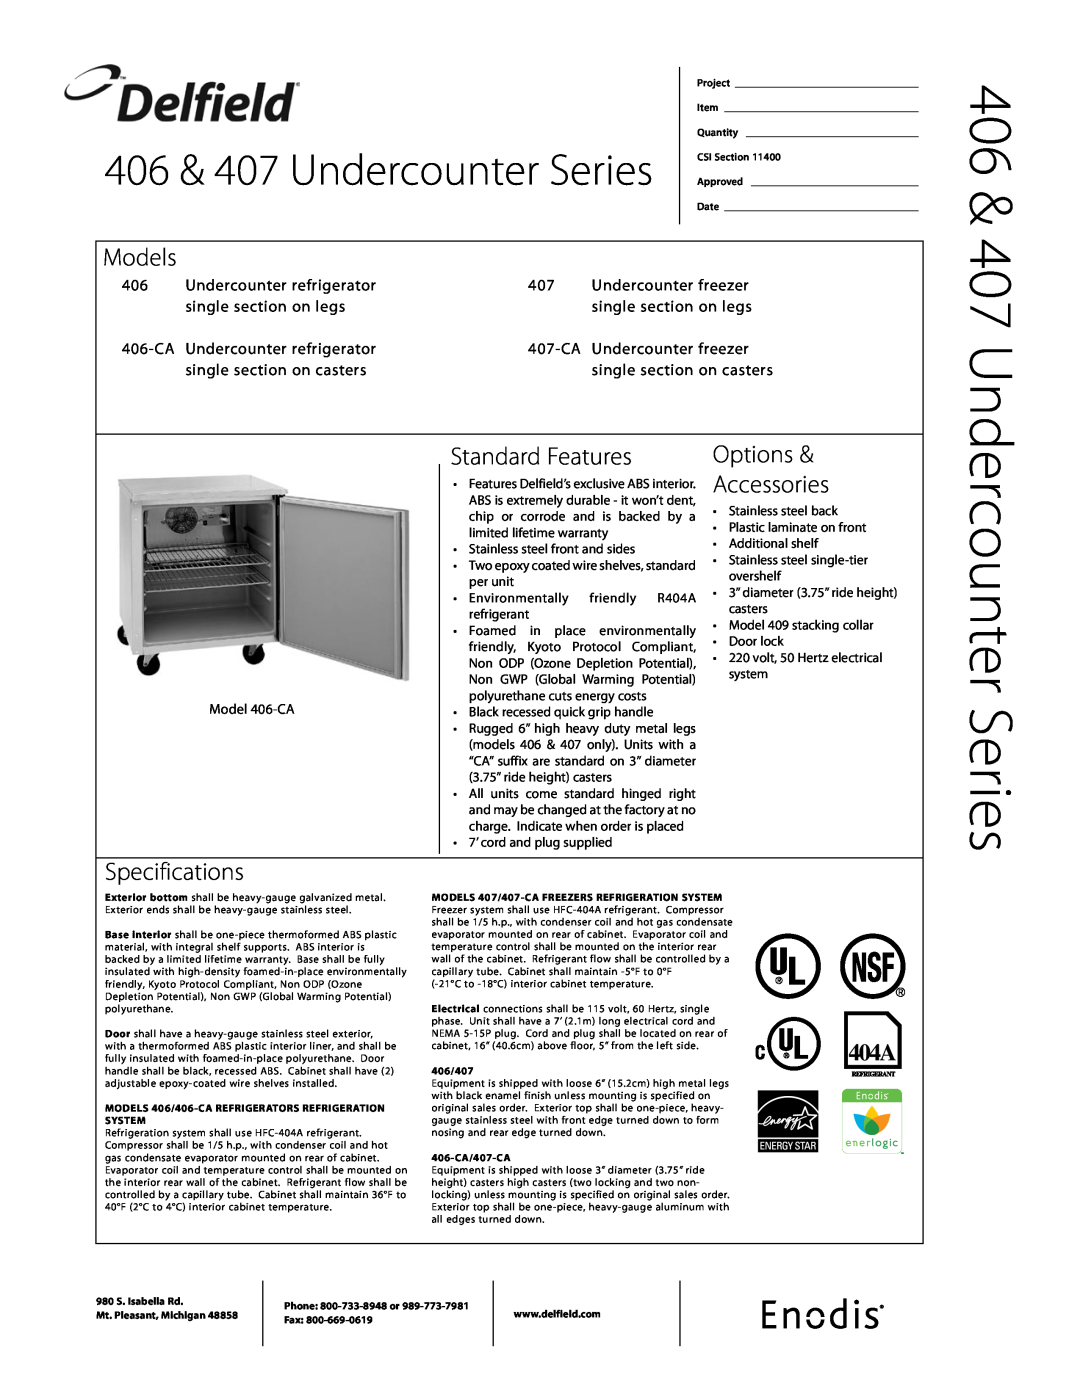 Delfield 406-CA specifications Models, Standard Features, Options & Accessories, Specifications, Undercounter Series 